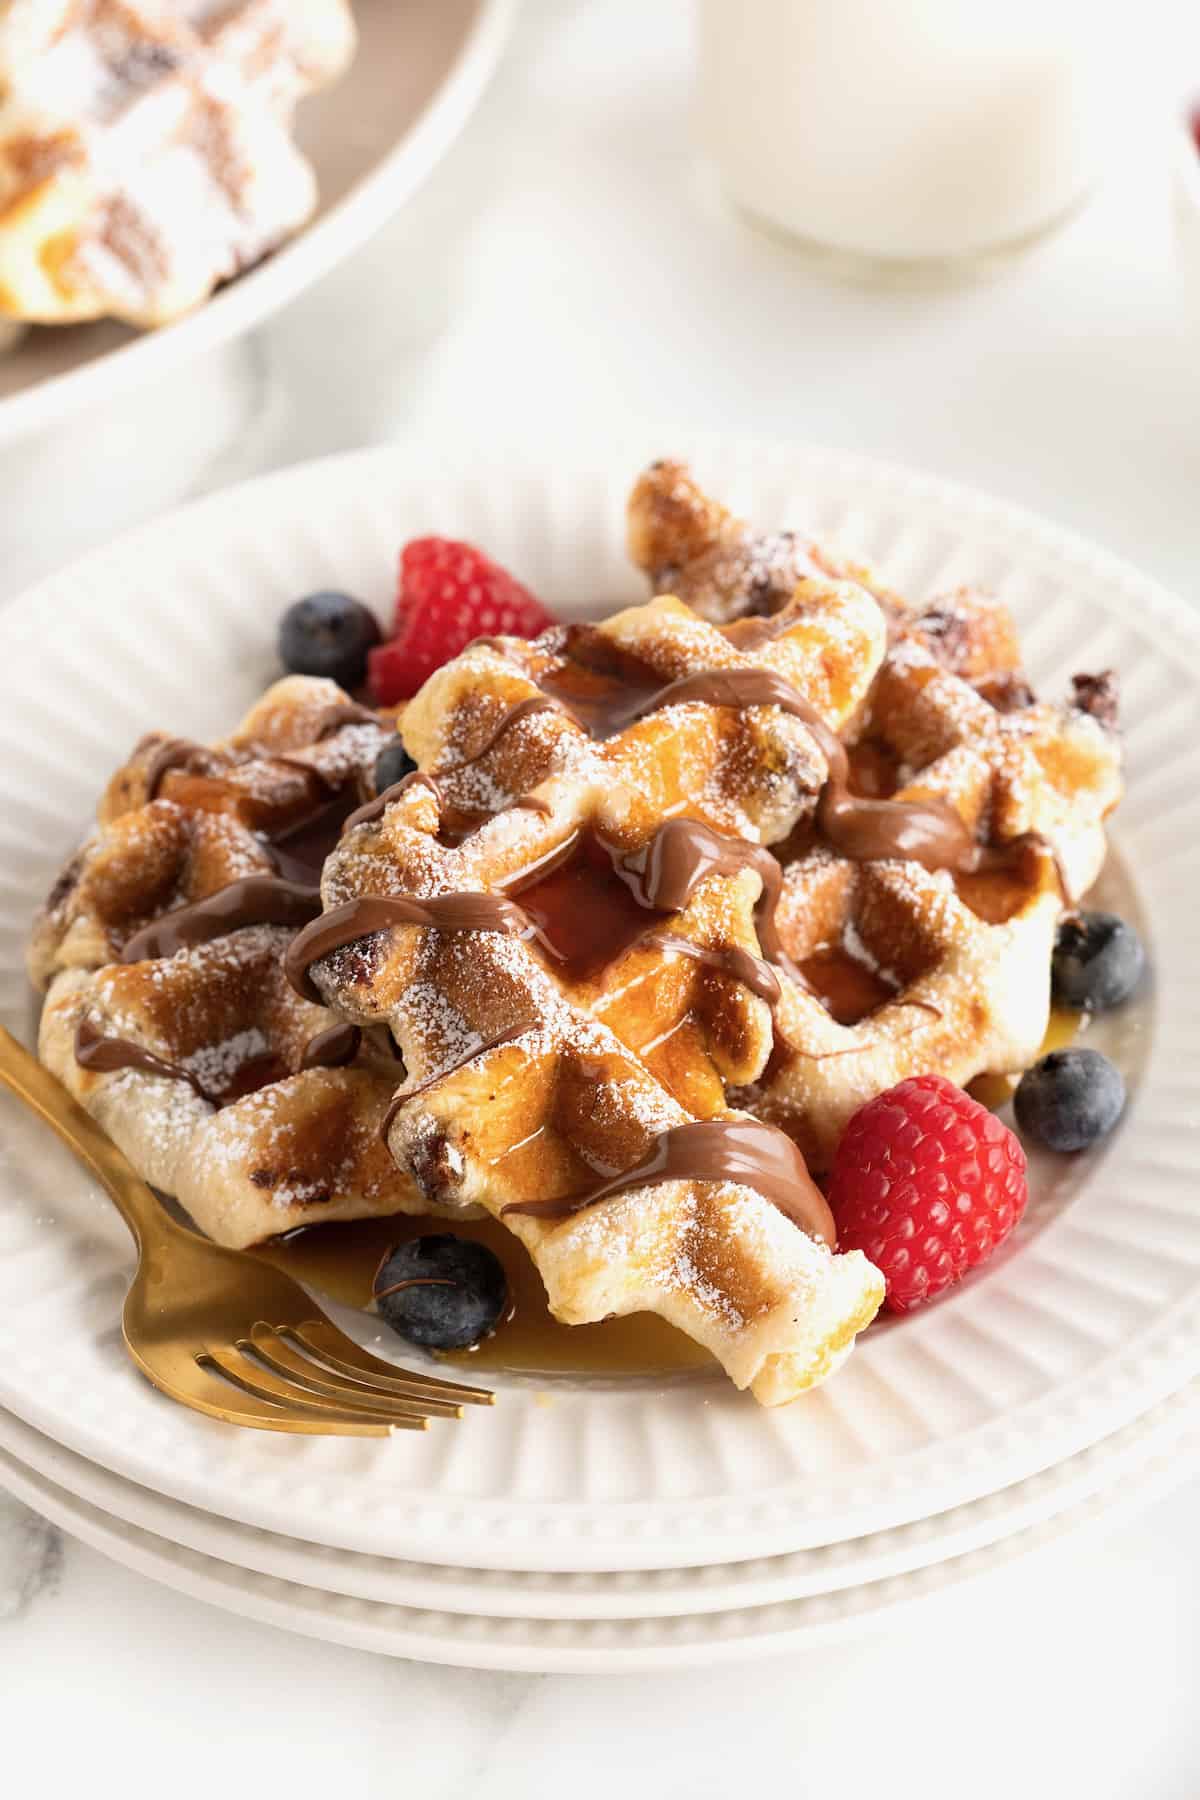 A large white fluted plate with two waffle-textured pastries topped with powdered sugar, a Nutella drizzle, maple syrup, blueberries and raspberries.